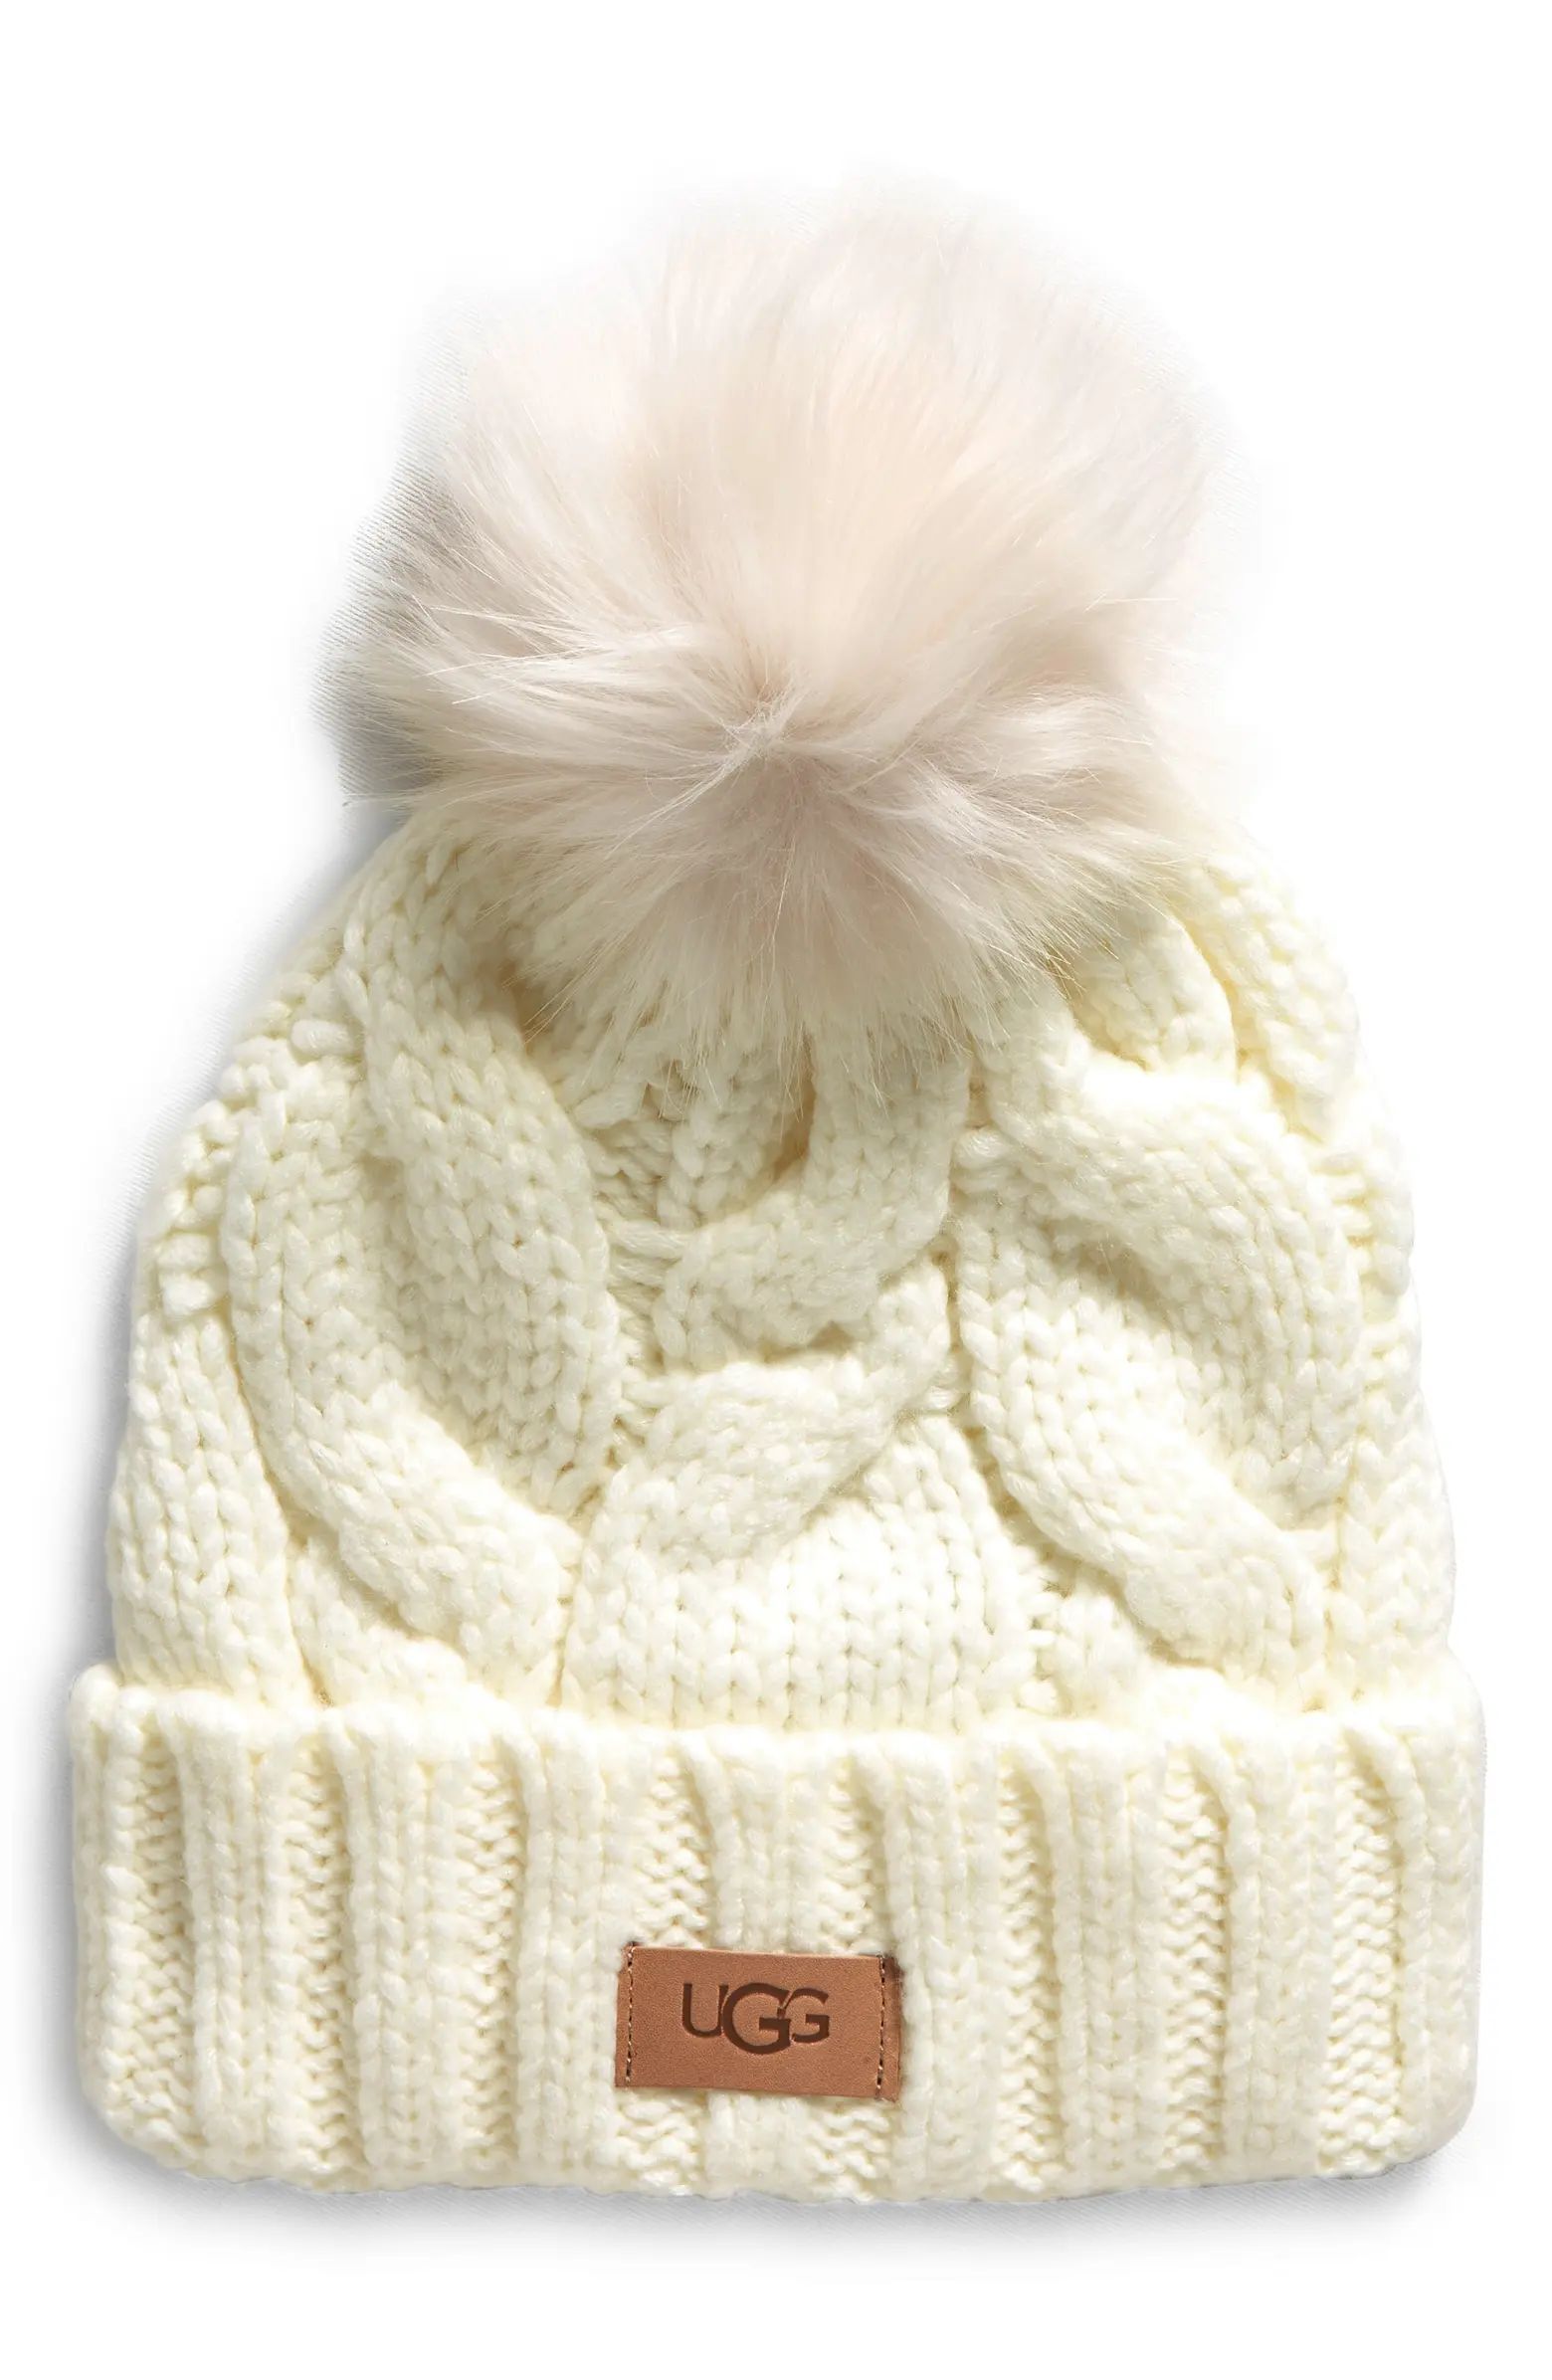 Cable Knit Pom Beanie | Nordstrom